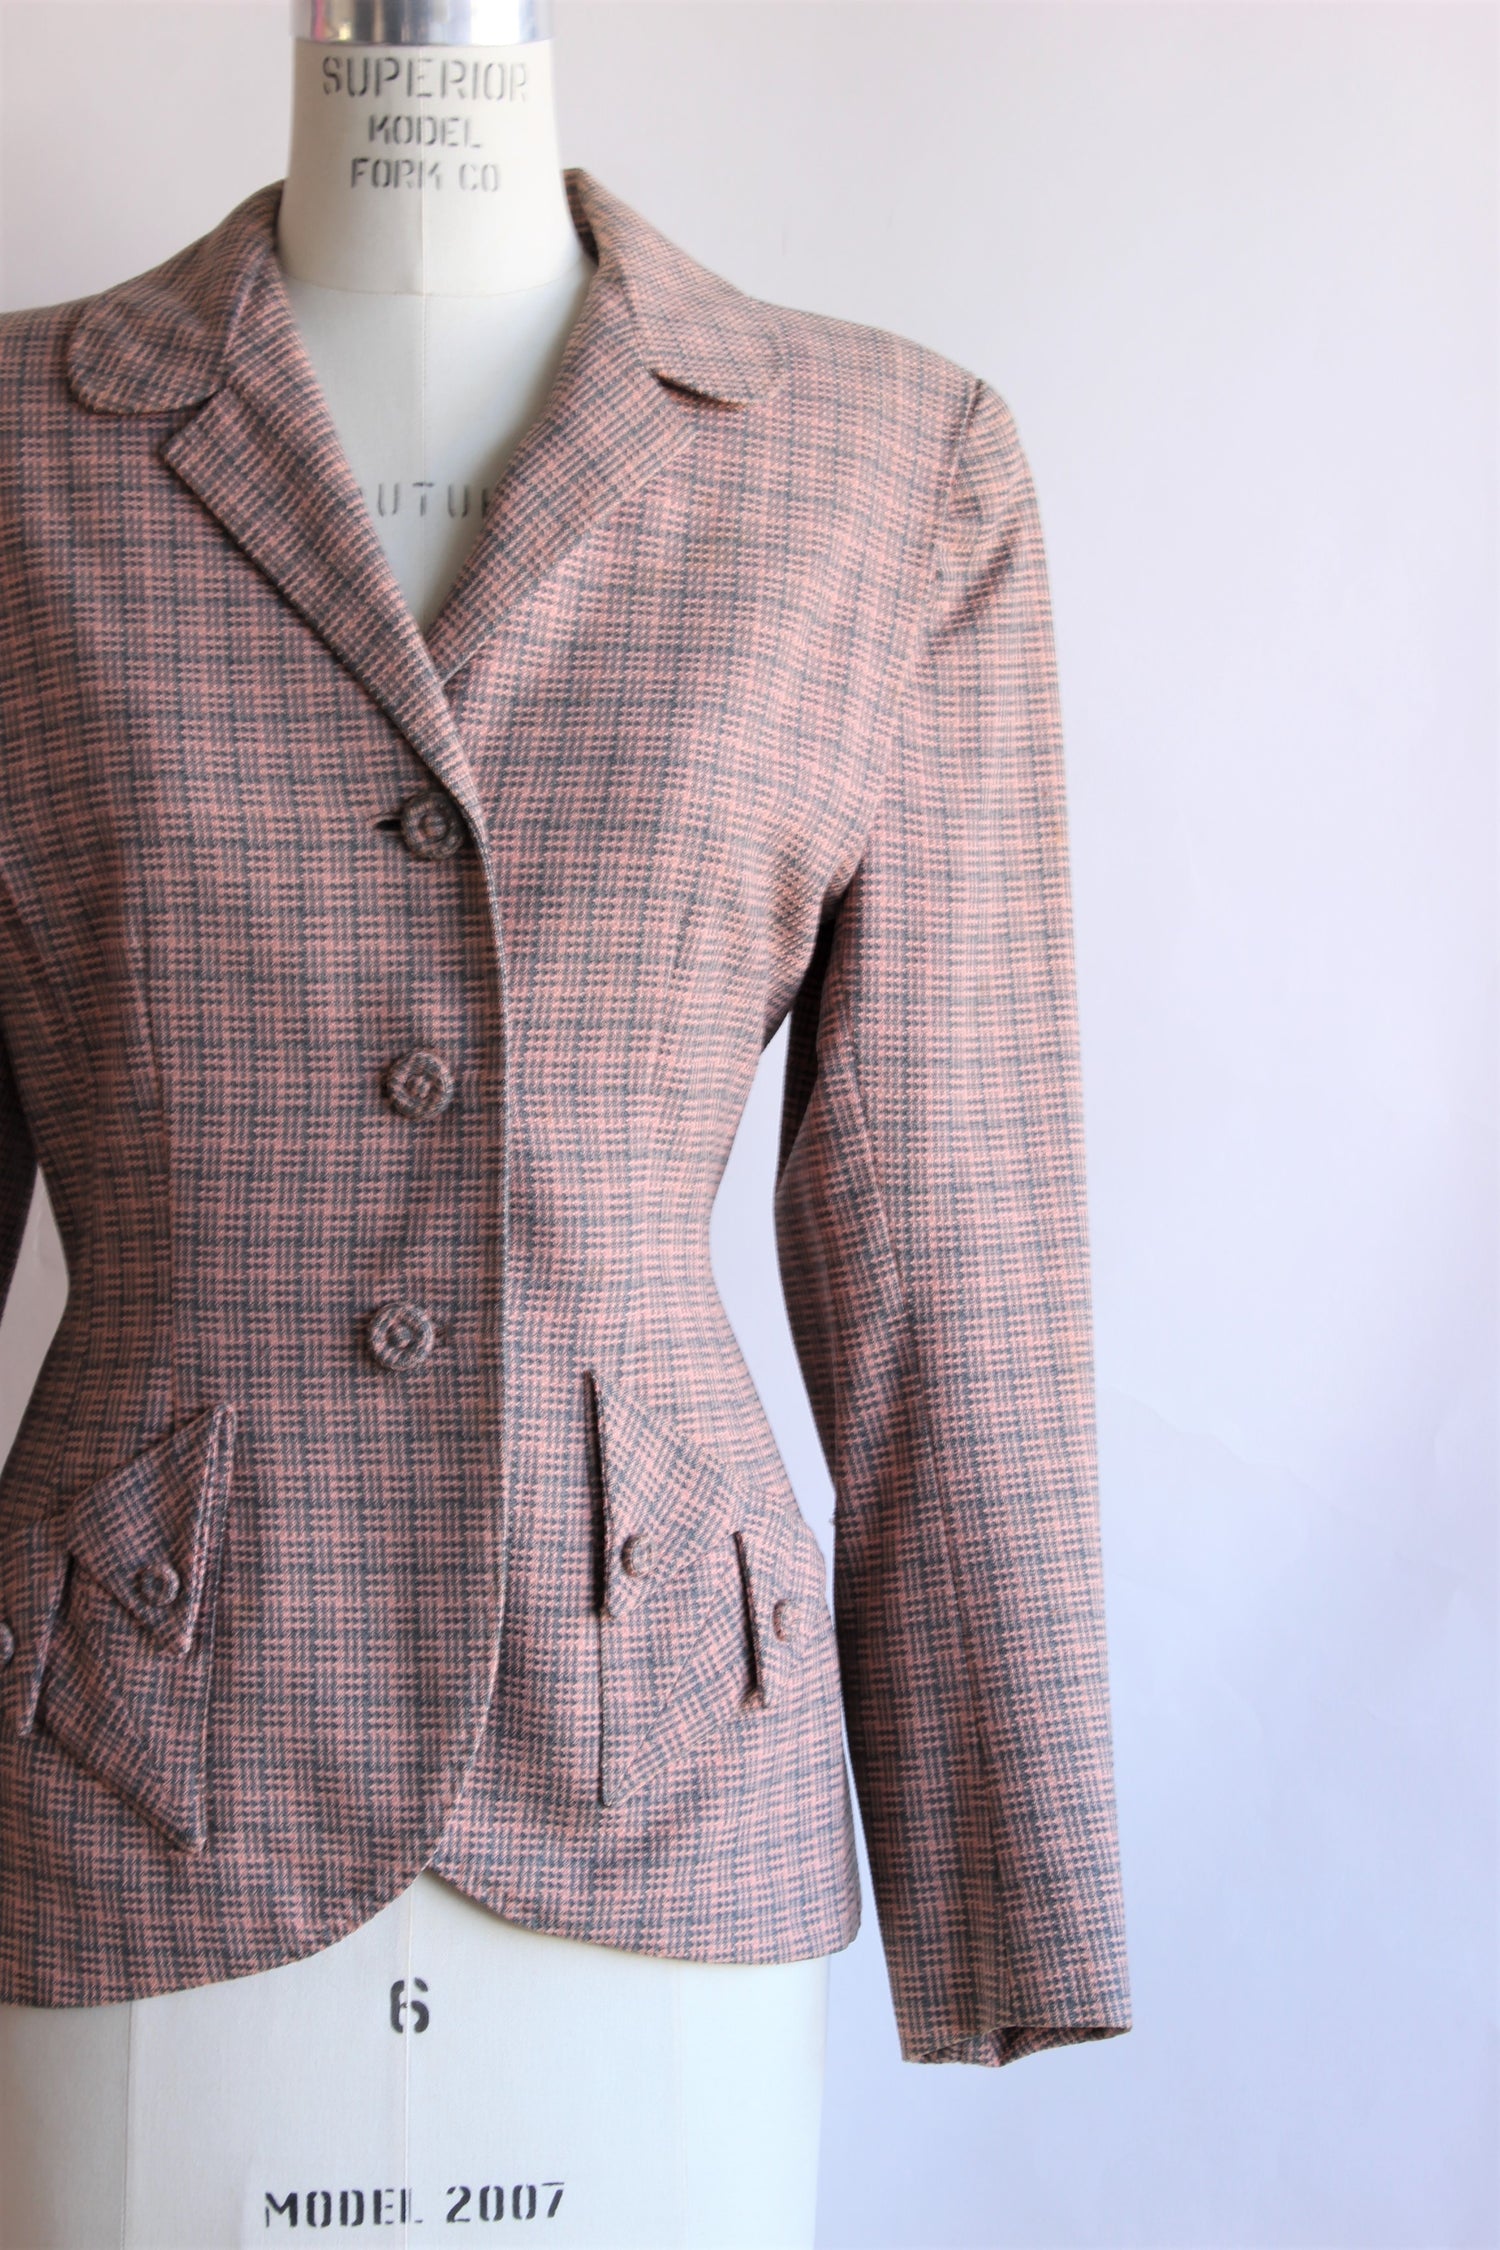 VIntage 1950s Gray and Pink Jacket With Pink Lining By Friedmont